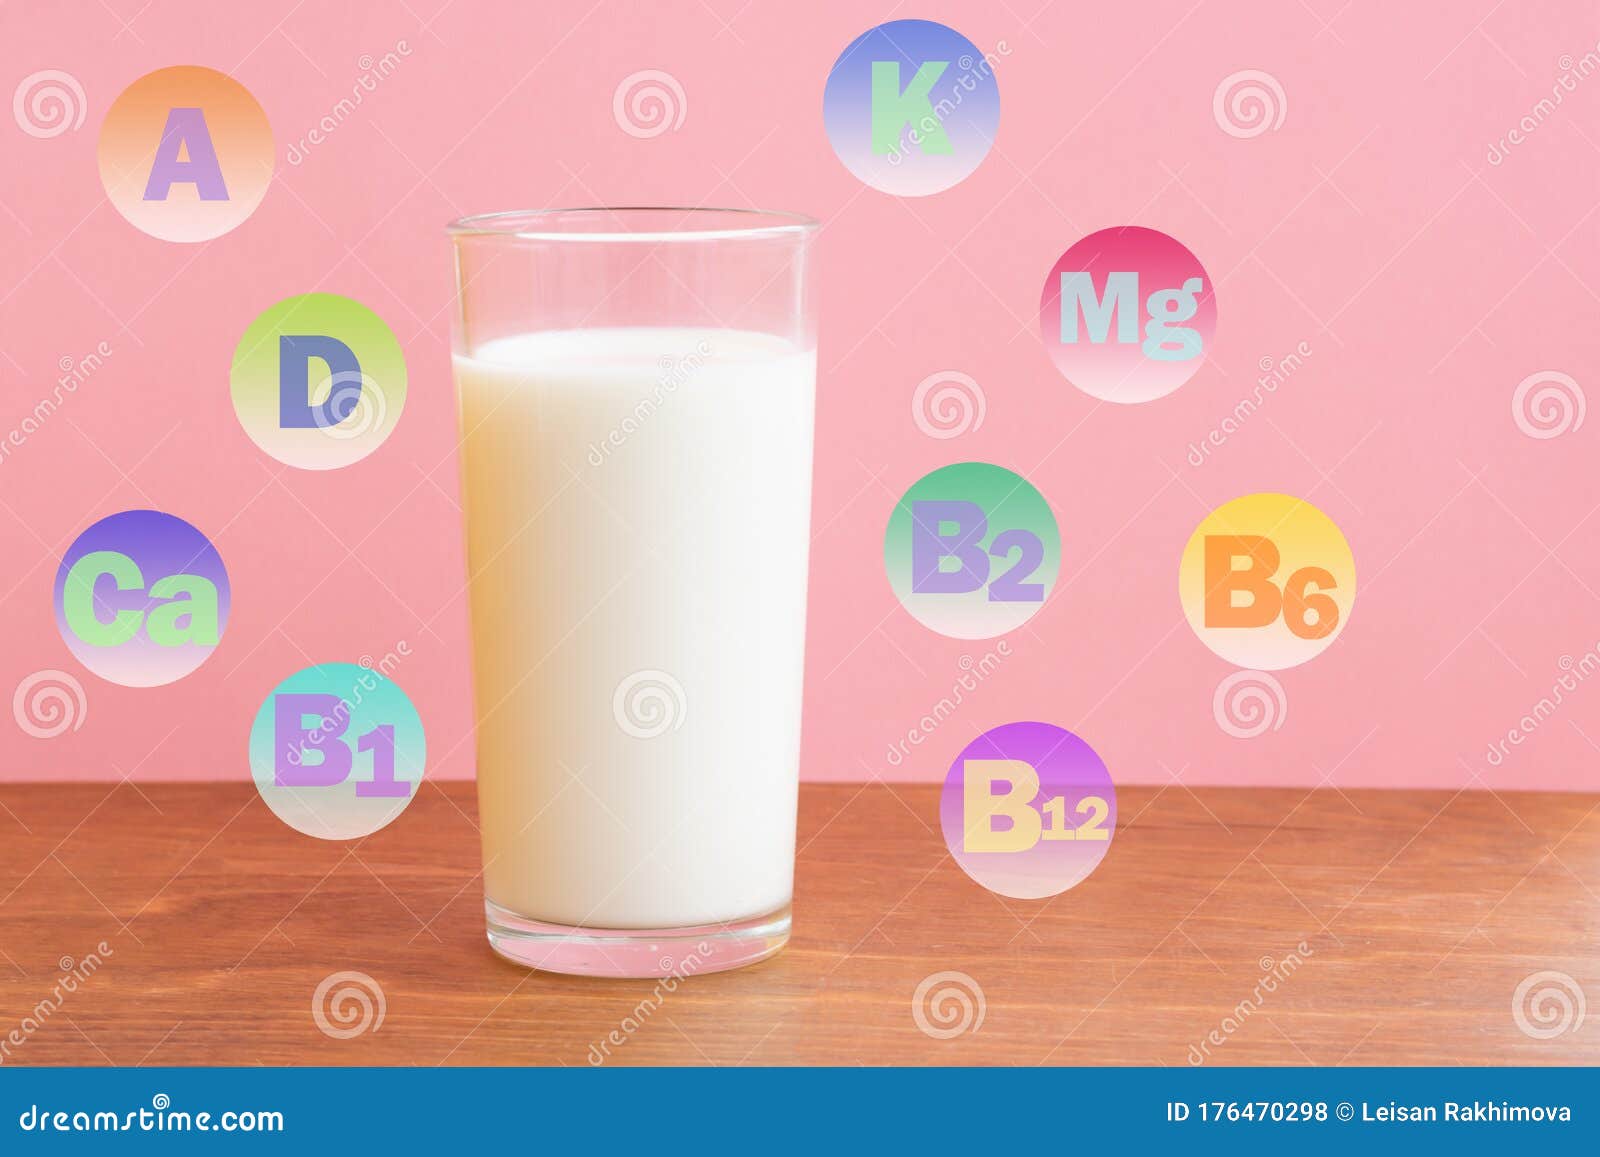 glass of fresh milk on wooden table with pink background. milk in glass with chemical abbreviations of vitamins and minerals